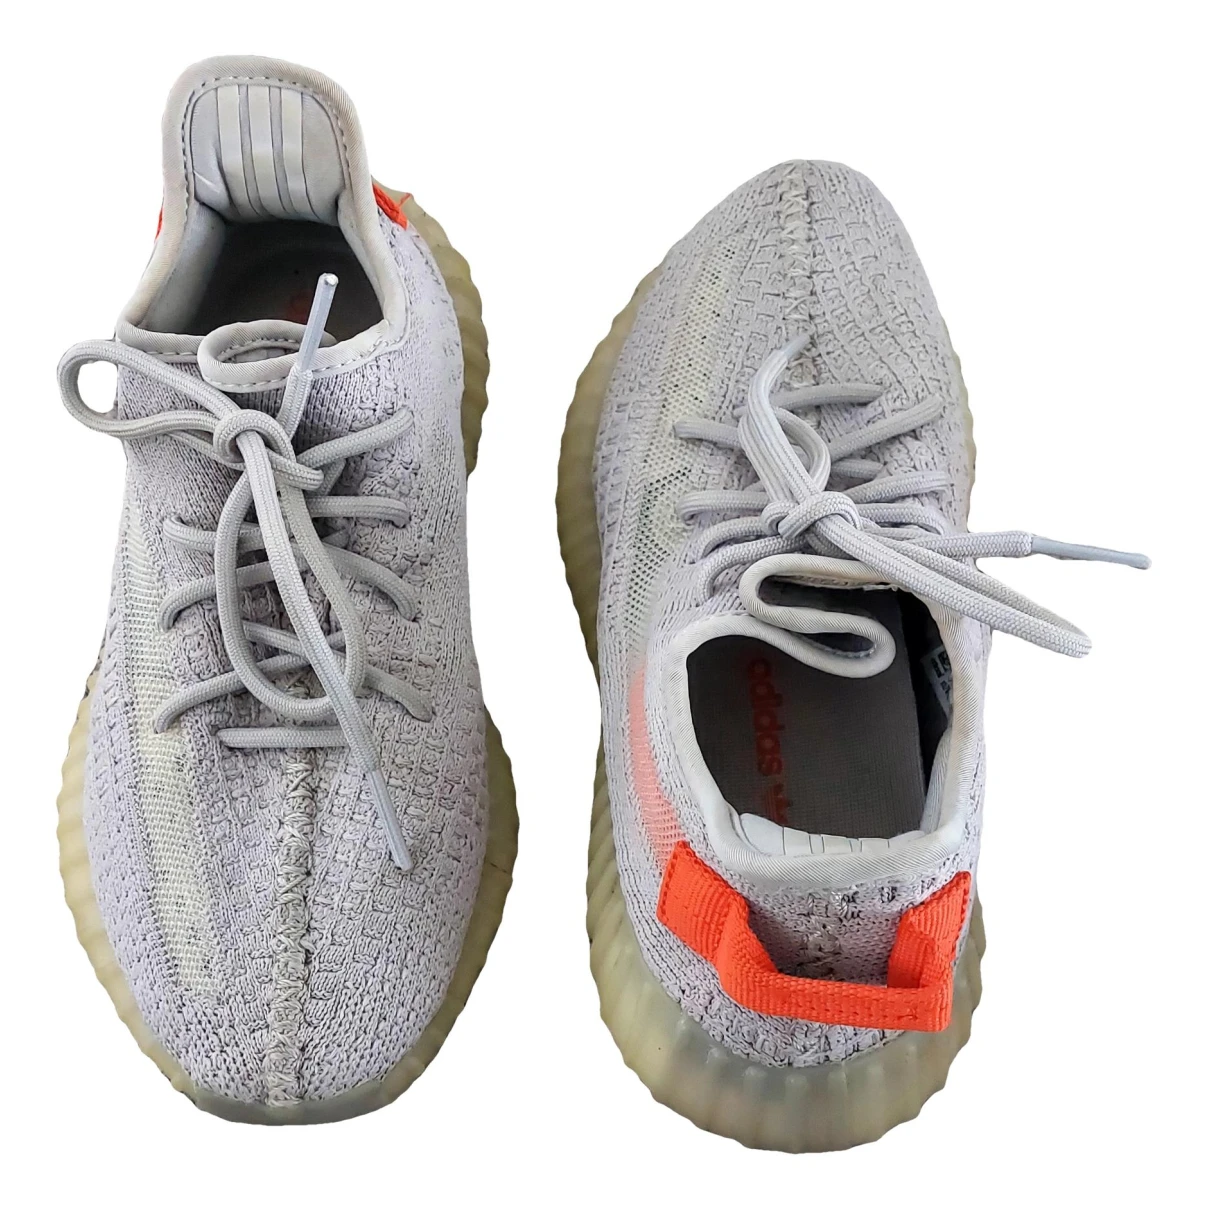 Pre-owned Yeezy X Adidas Boost 350 V2 Cloth Trainers In Grey